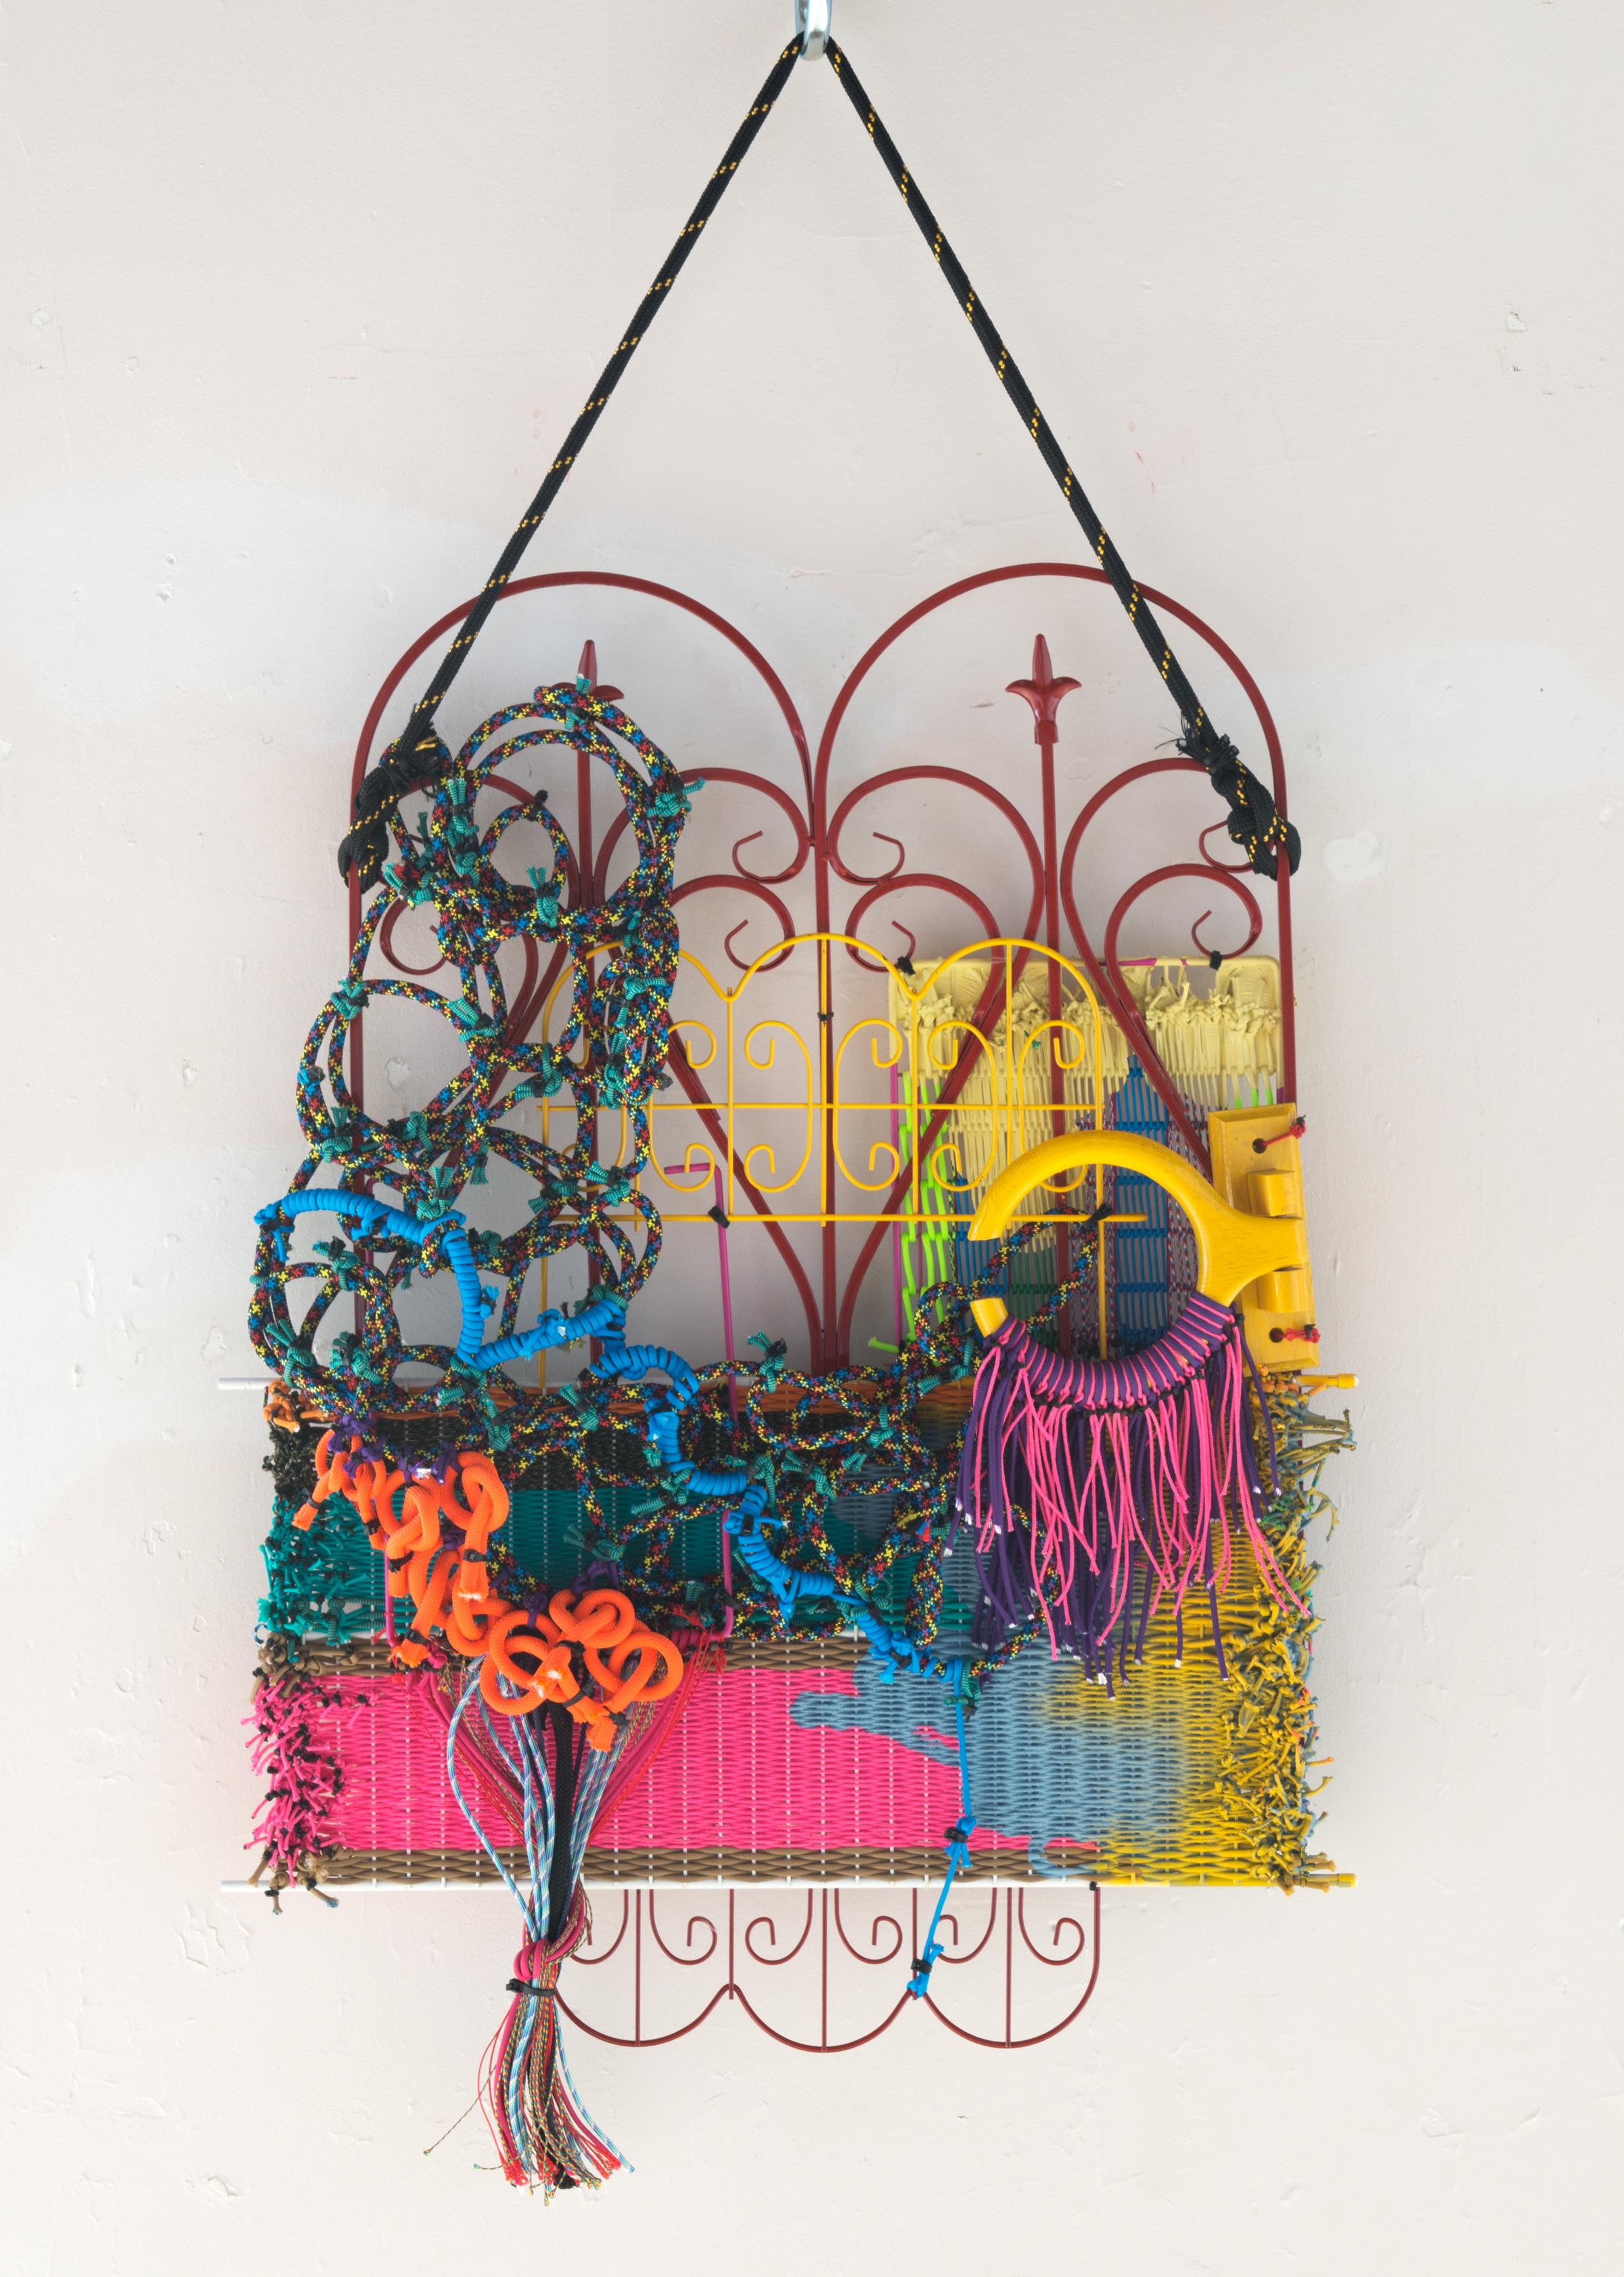 Liz Miller Abstract Sculpture - STRUCTURAL POROSITY 02 - Sculptural Wall Hanging w/ Found & Repurposed Objects